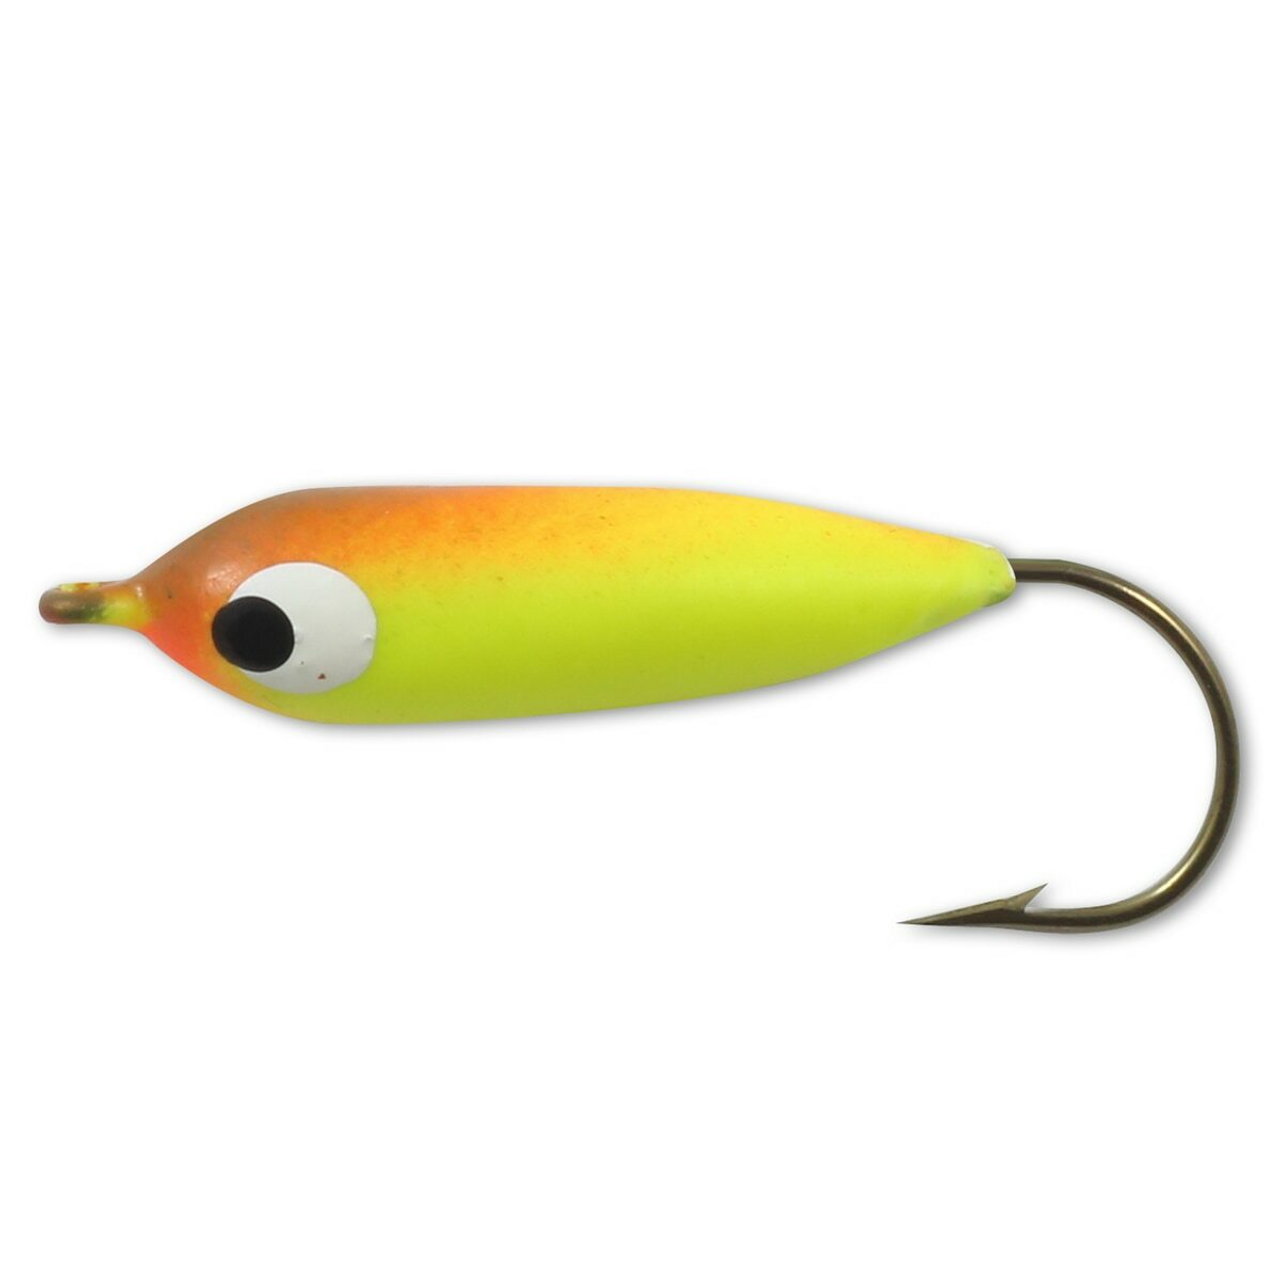 Northland Gum-Drop Floater, #1/0 Hook, Crawfish, 3 Pc - THE FISHING SOURCE